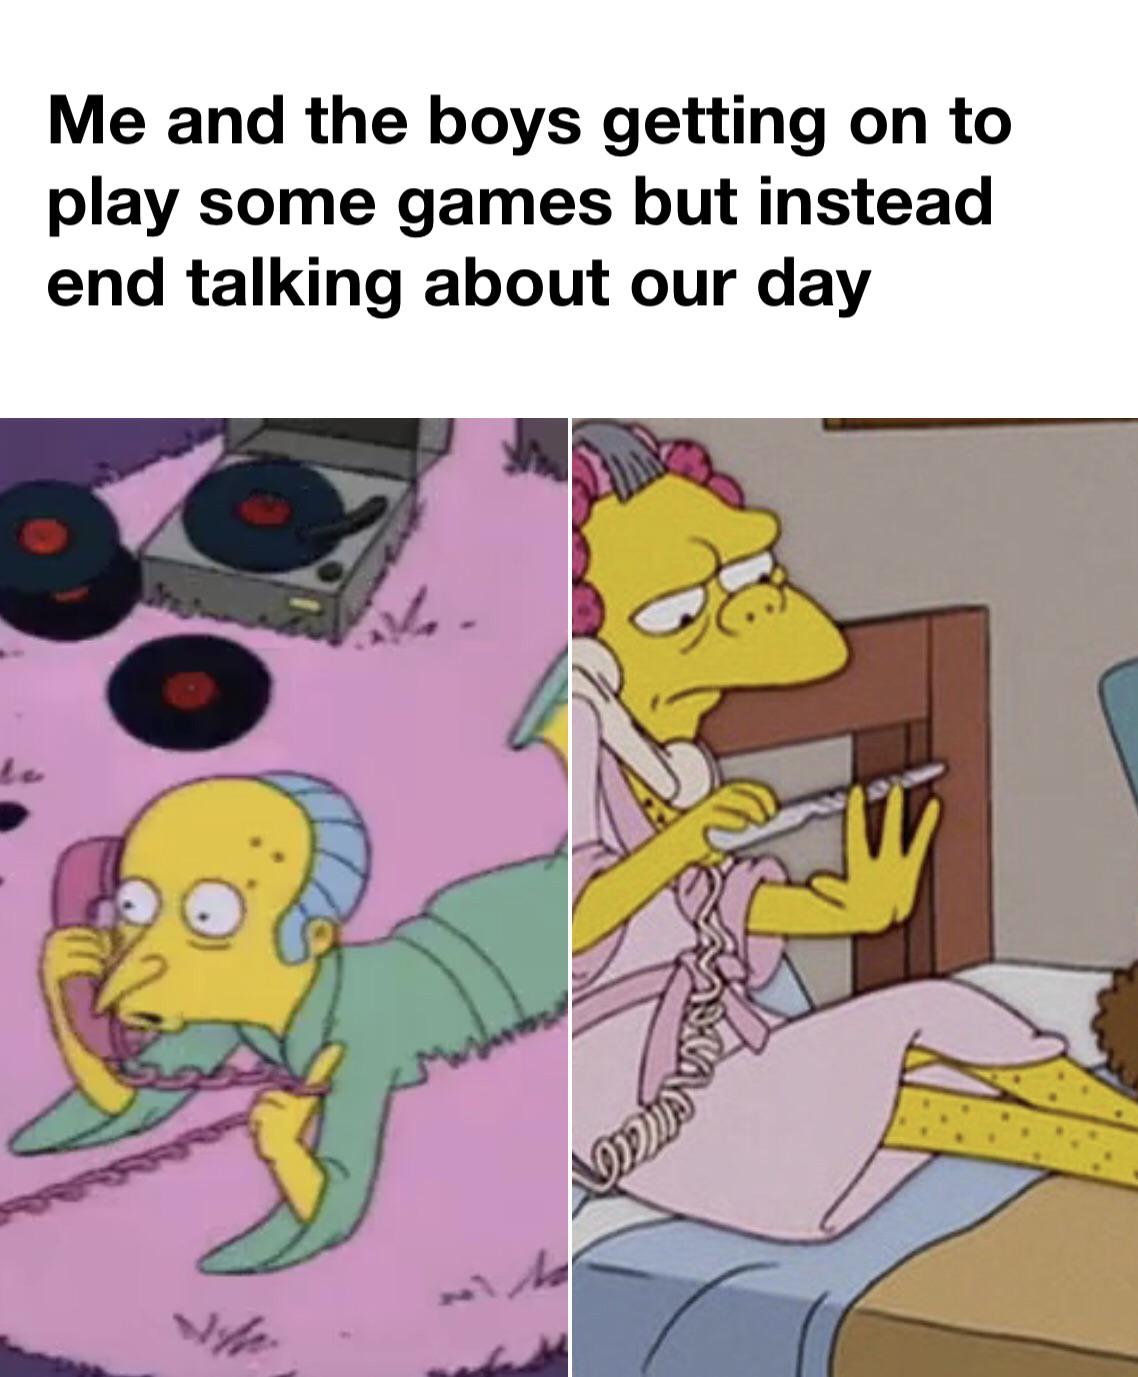 funny gaming memes - Me and the boys getting on to play some games but instead end talking about our day